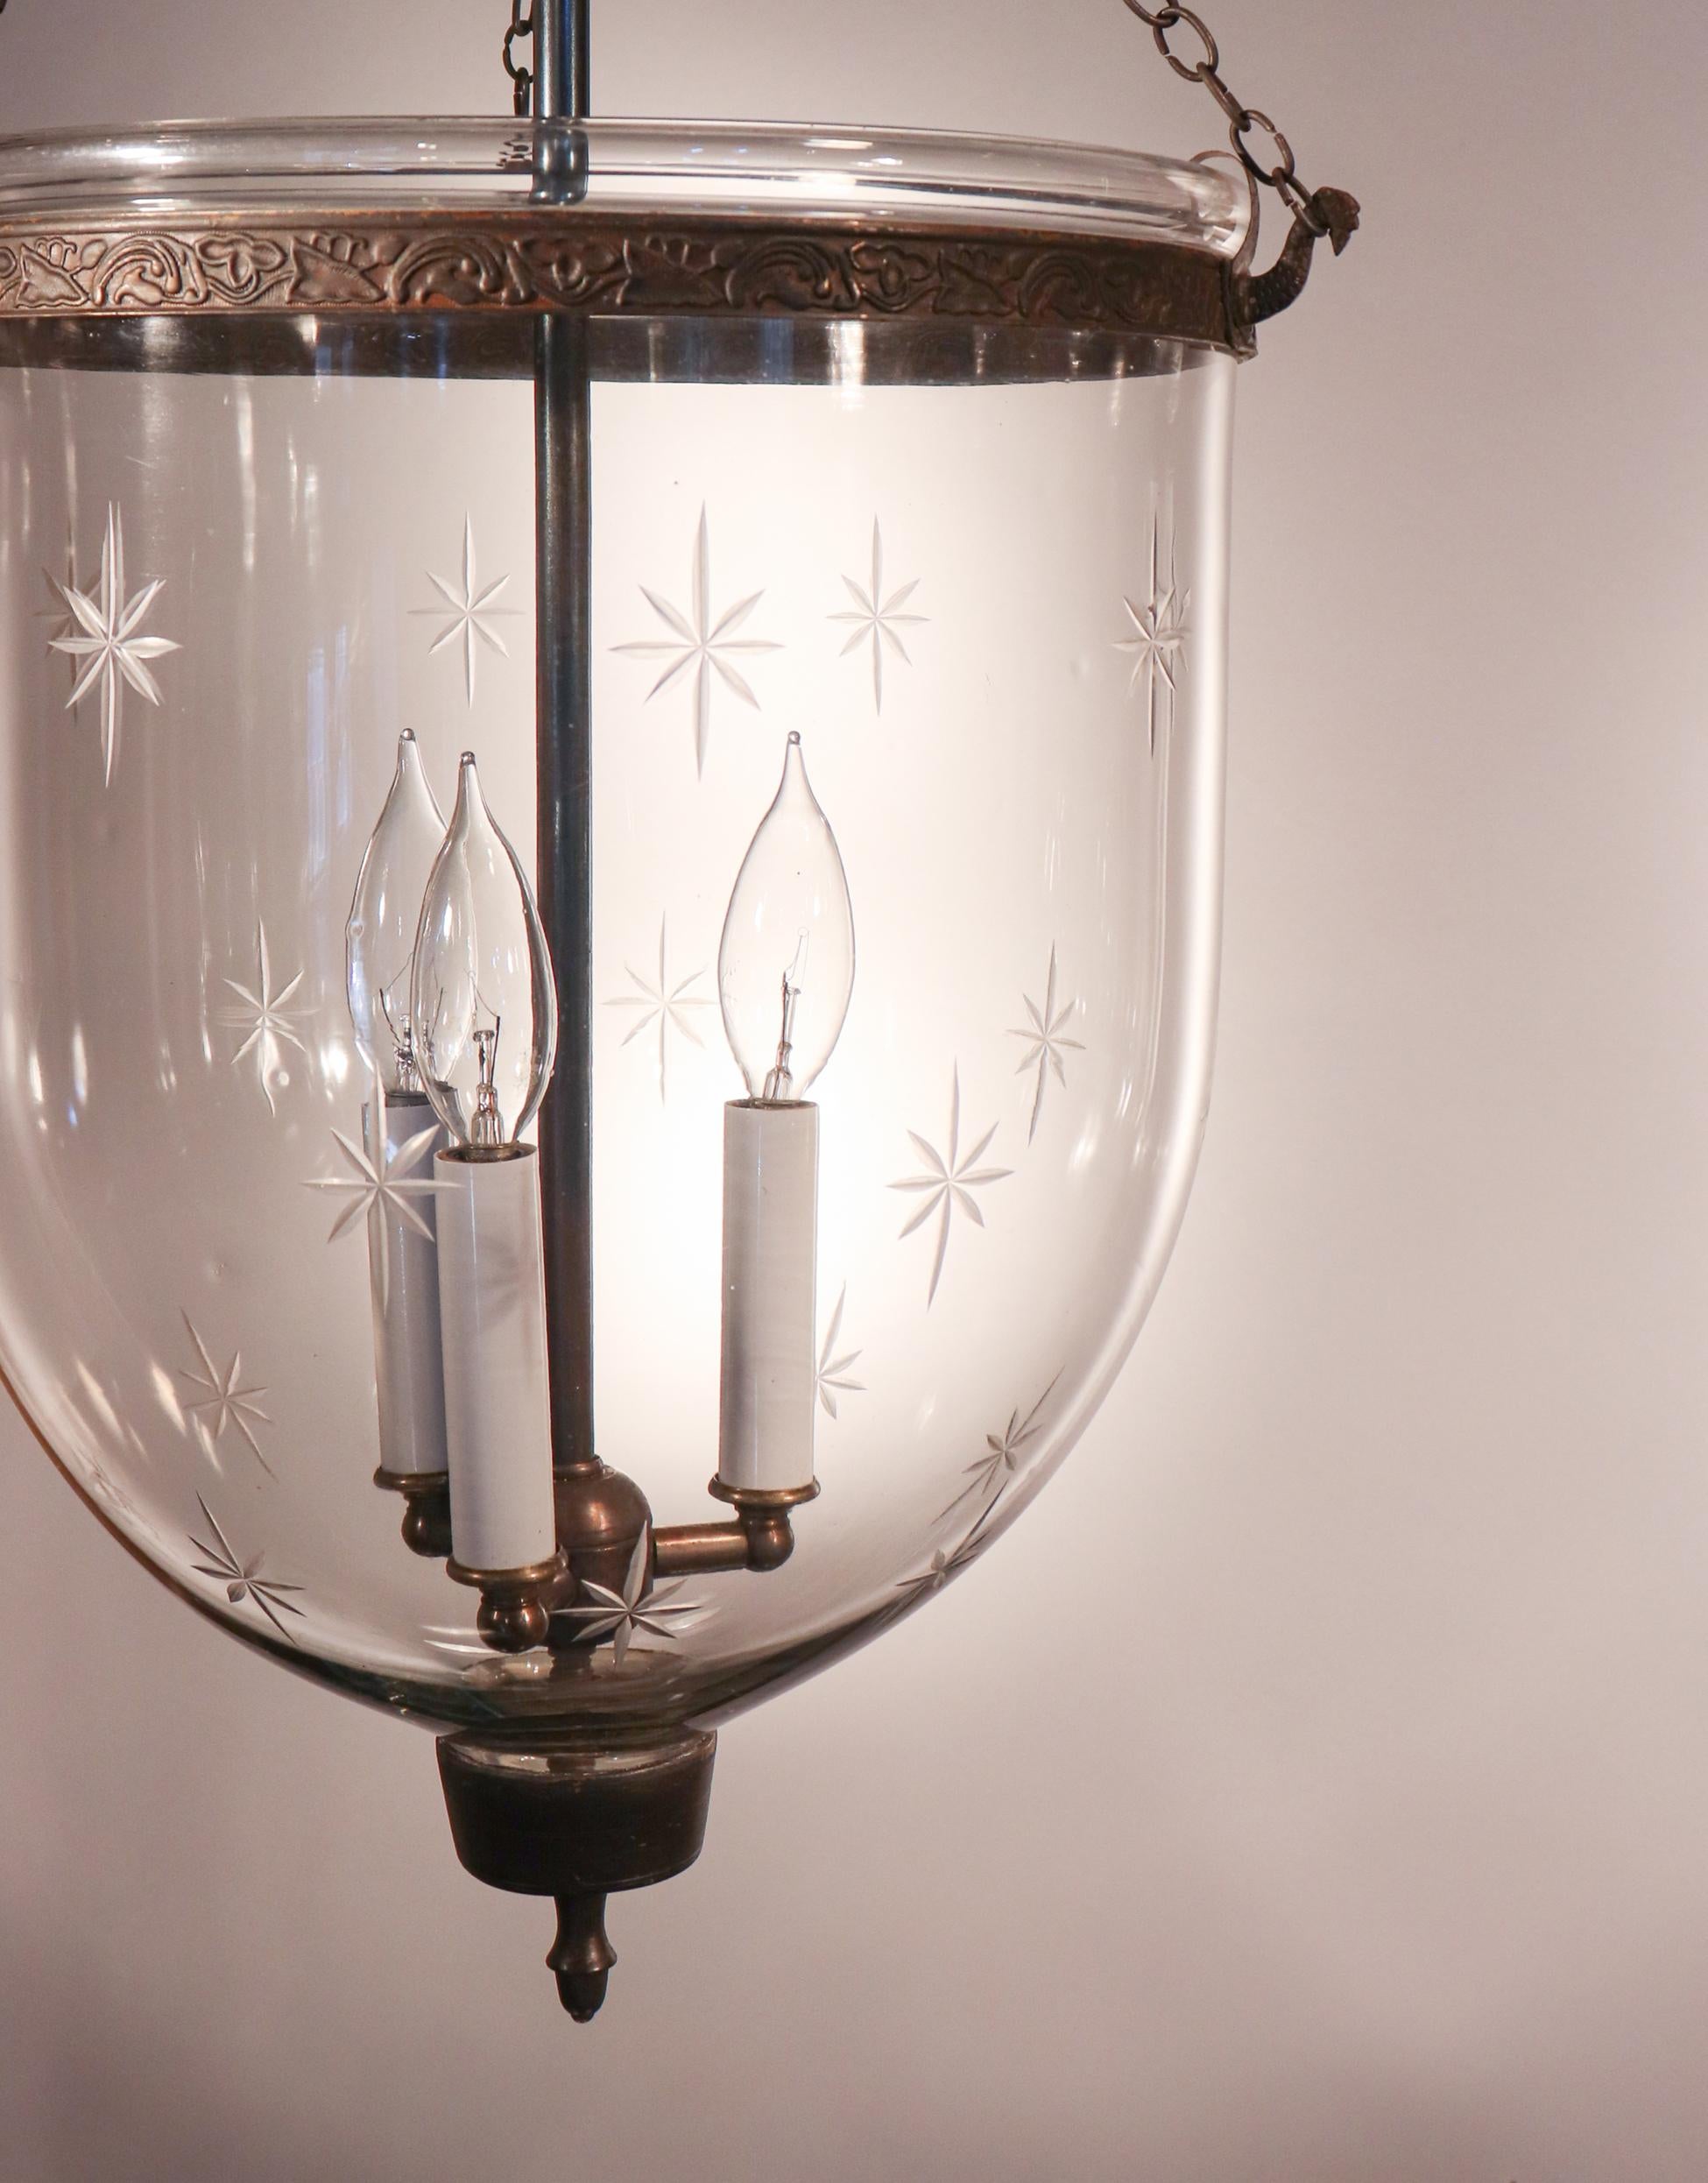 Glass Pair of Antique Bell Jar Lanterns with Etched Stars